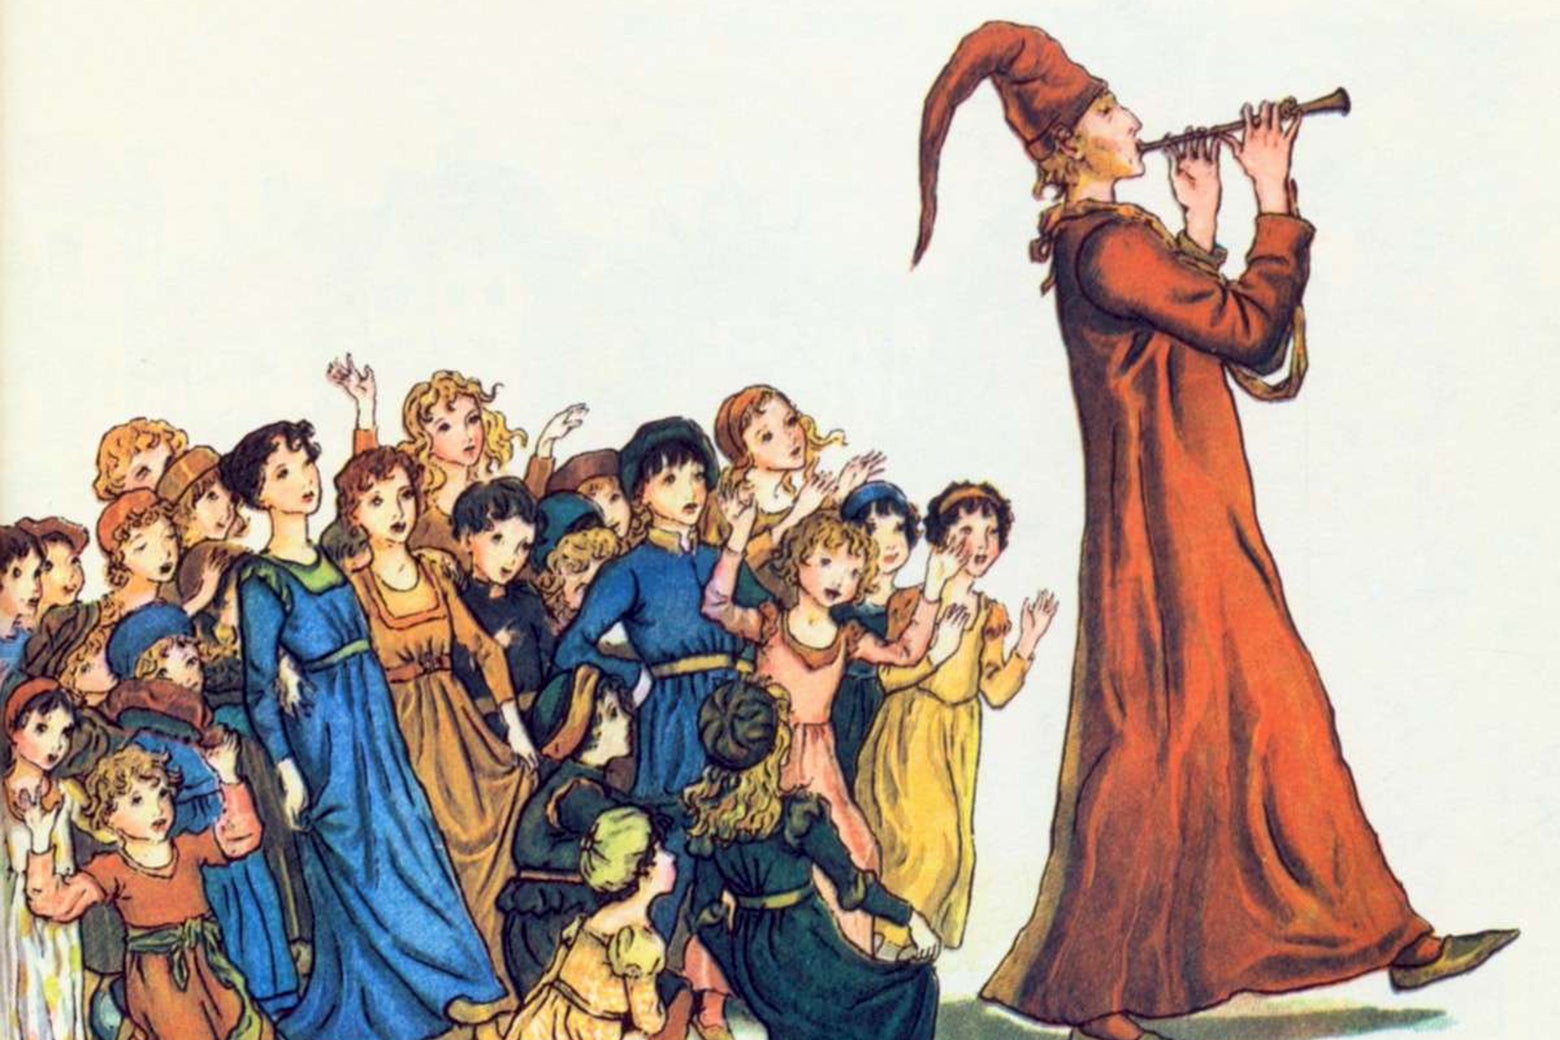 A vintage illustration of the Pied Piper leading children away.